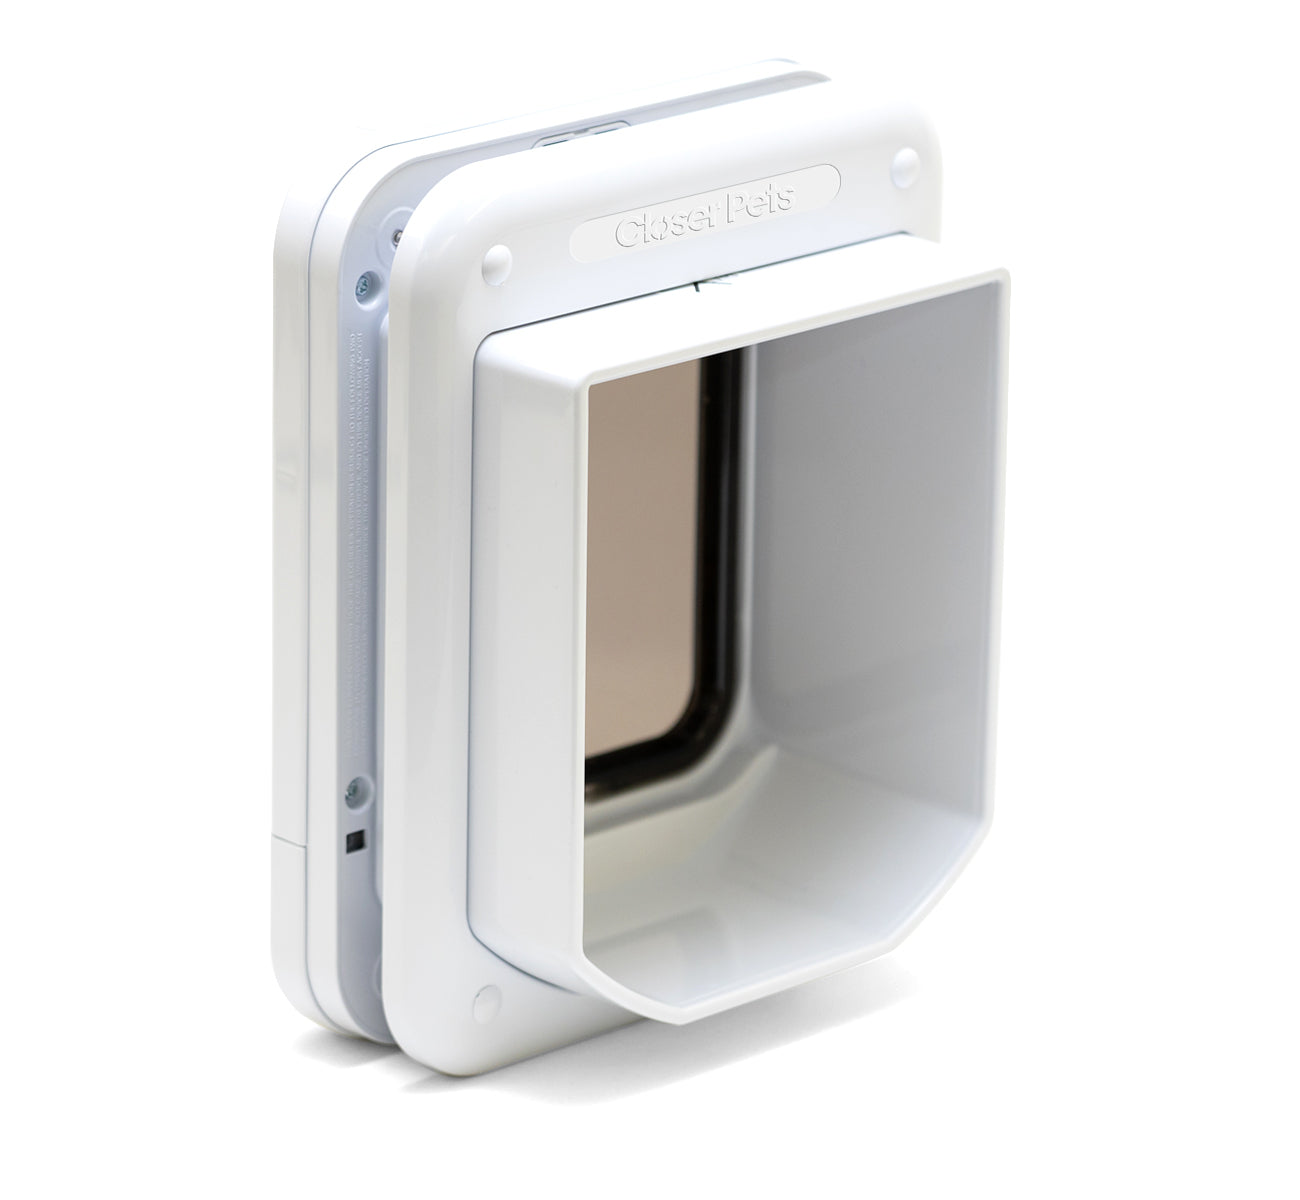 Closer Pets Microchip-activated Weatherproof Flap/Door with Manual Lock – White (CP 360W)